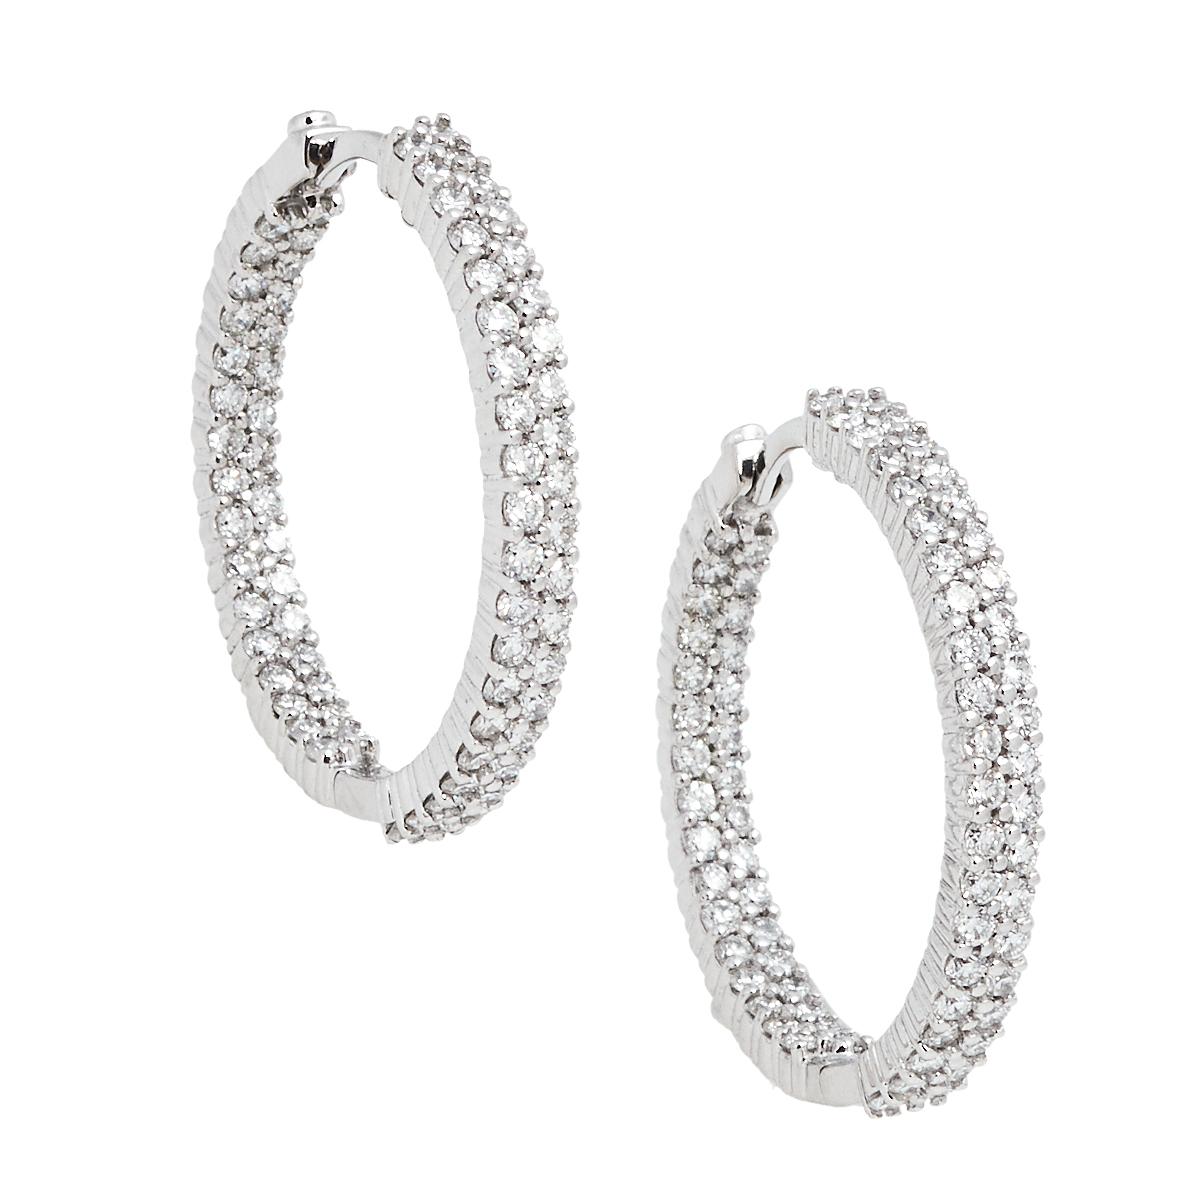 Roberto Coin flaunts the beauty of diamonds in these hoop earrings. The set comes shaped from 18k white gold and traced with brilliant-cut diamonds, each one shining with the other in harmony. The diamonds are all placed with a precision that once